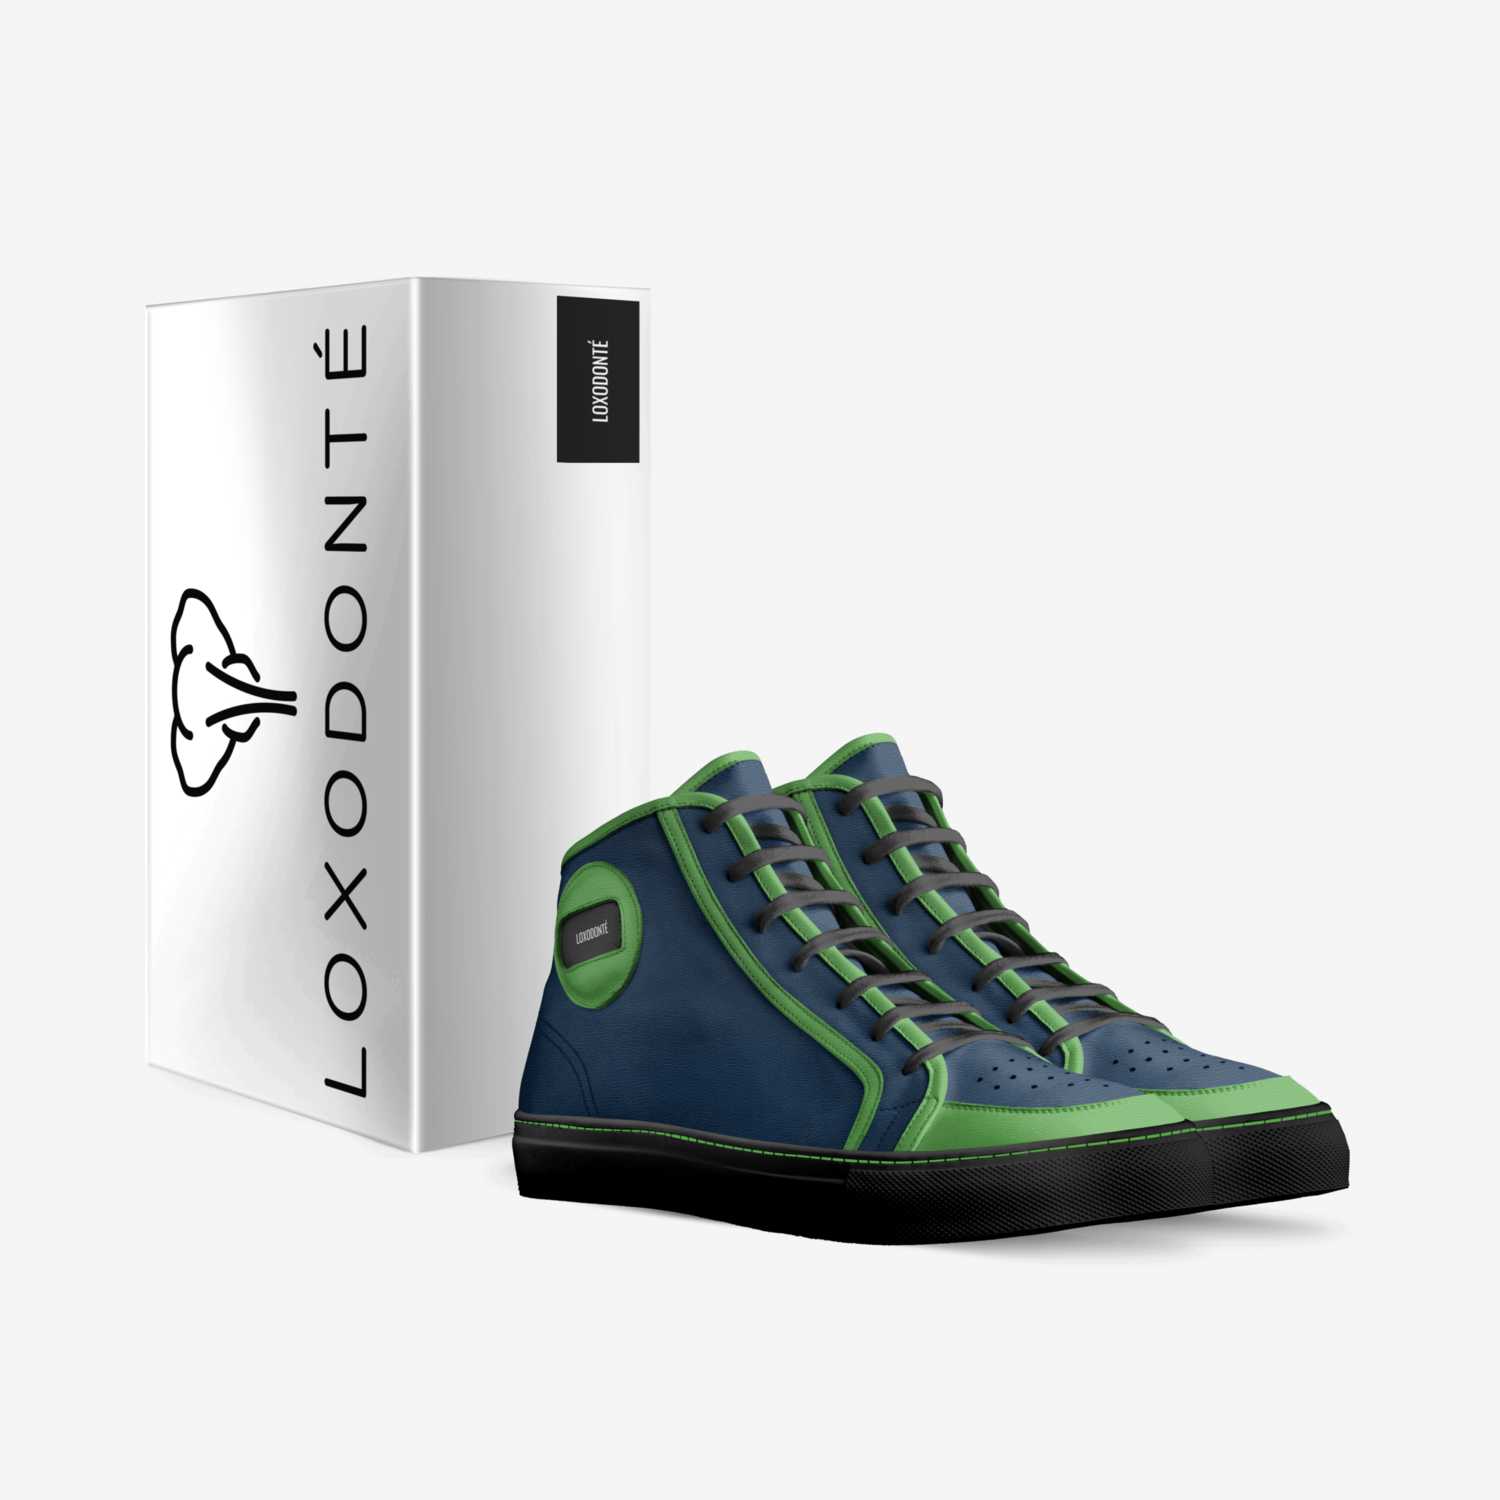 LOXODONTÉ custom made in Italy shoes by Thierry Betole | Box view